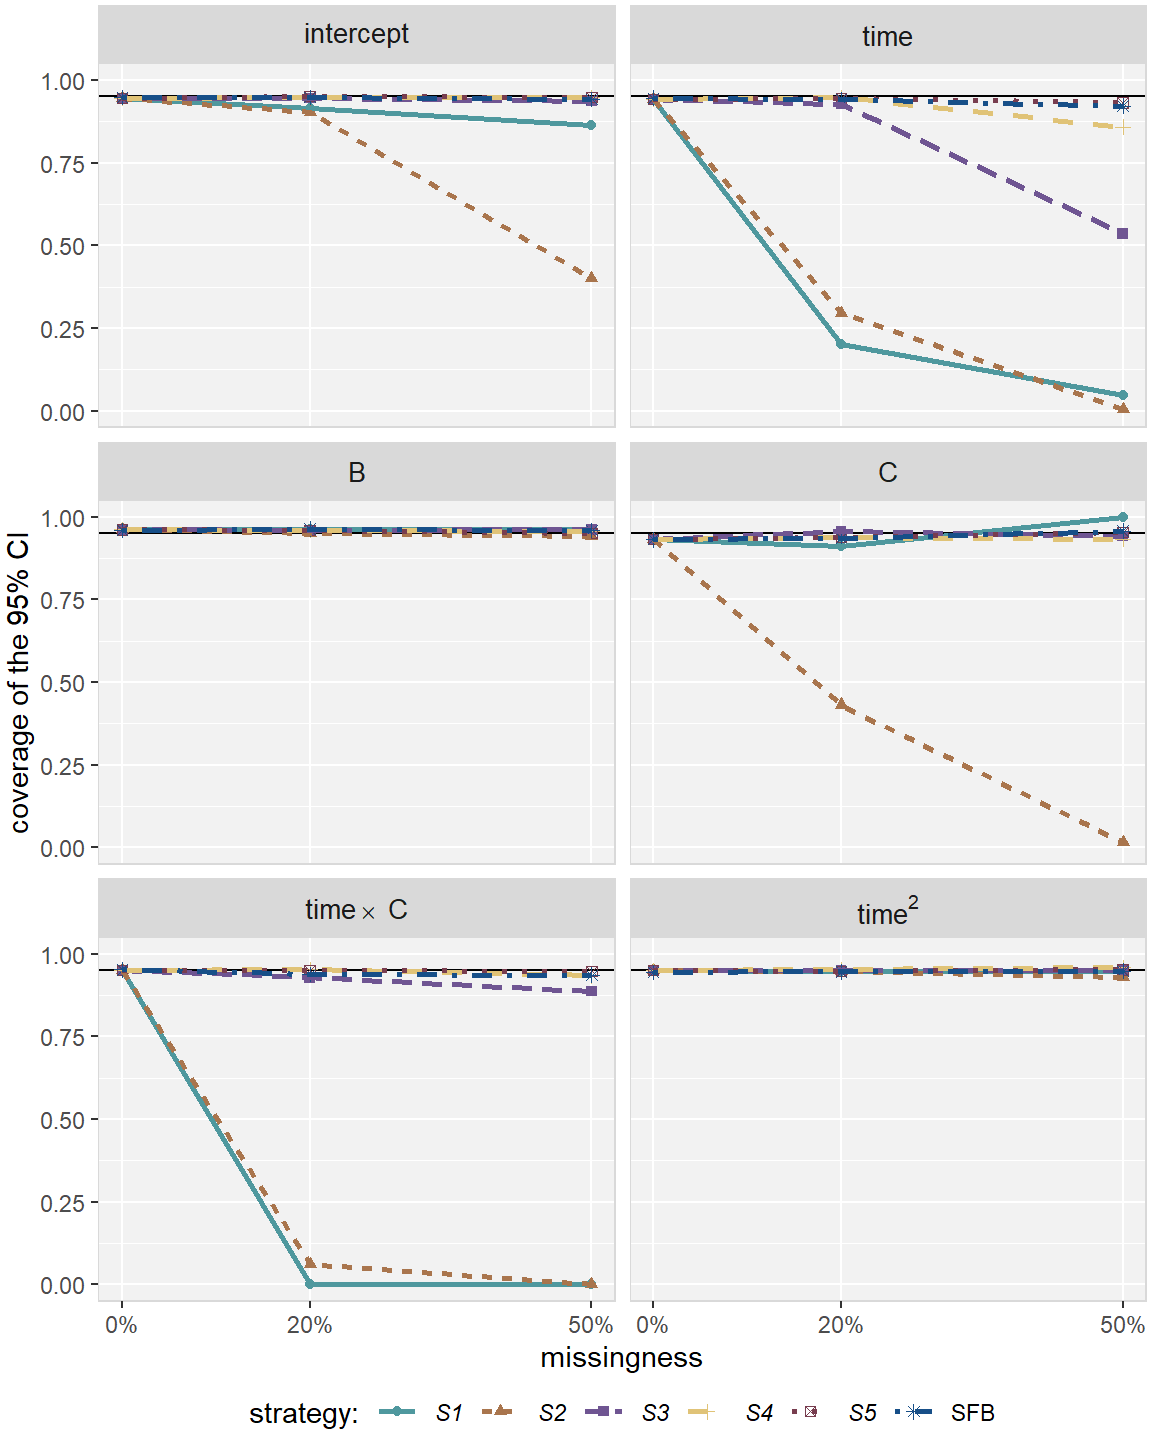 Coverage rate in simulation \textit{Scenario 1}, for the five imputation 
strategies using MICE (\textit{S1}--\textit{S5}) and the sequential fully Bayesian approach (SFB).